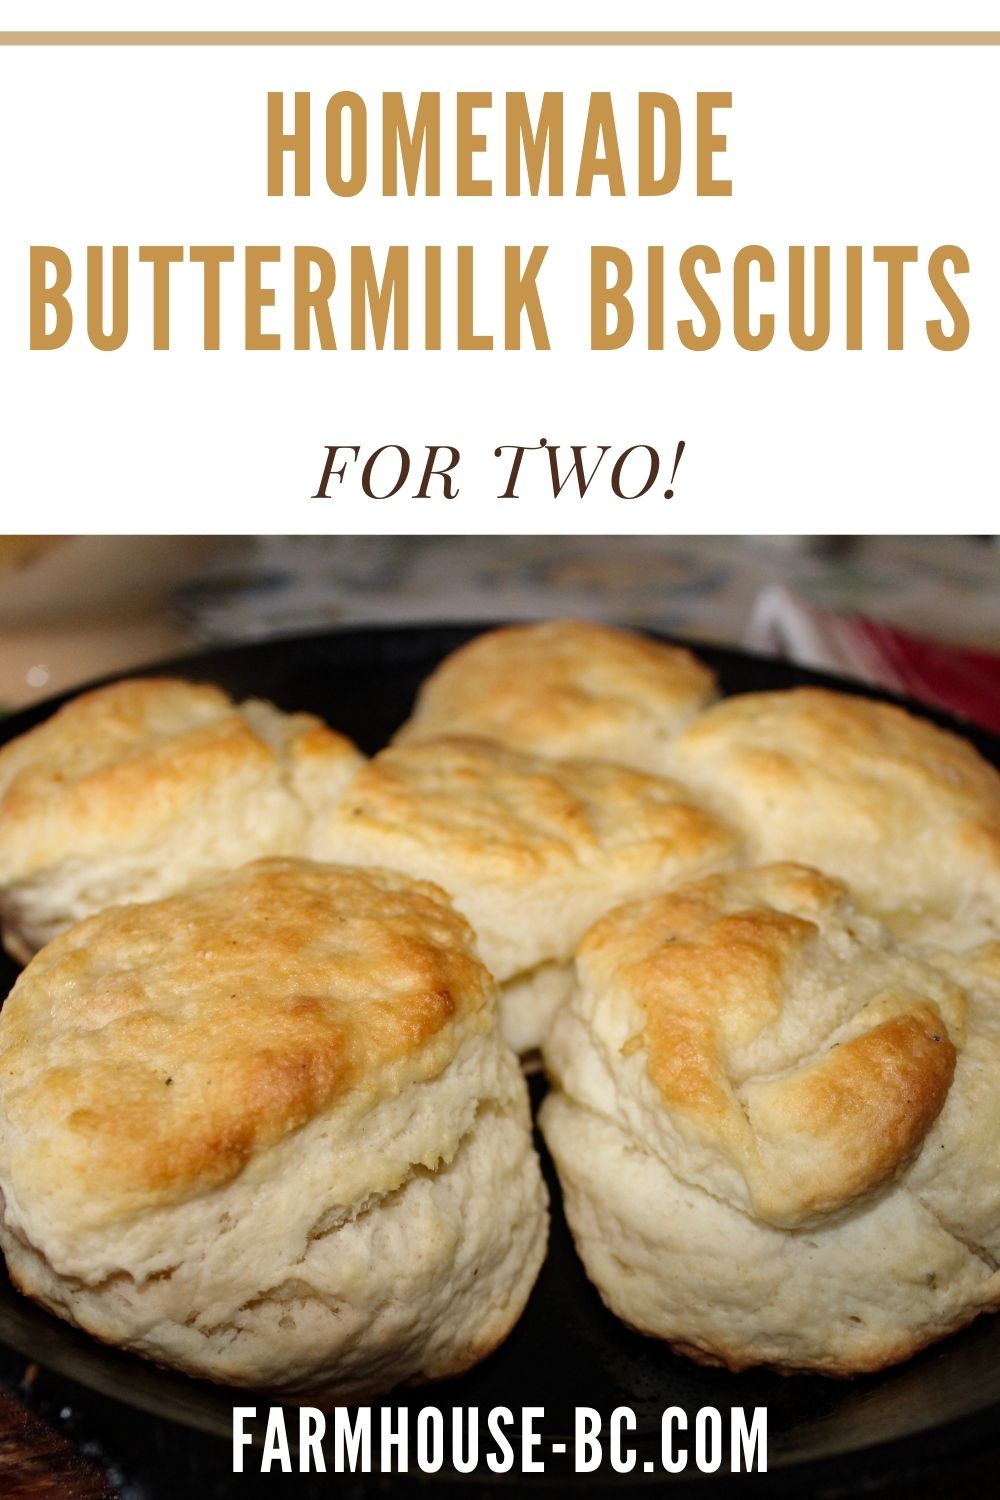 Flaky buttermilk biscuits